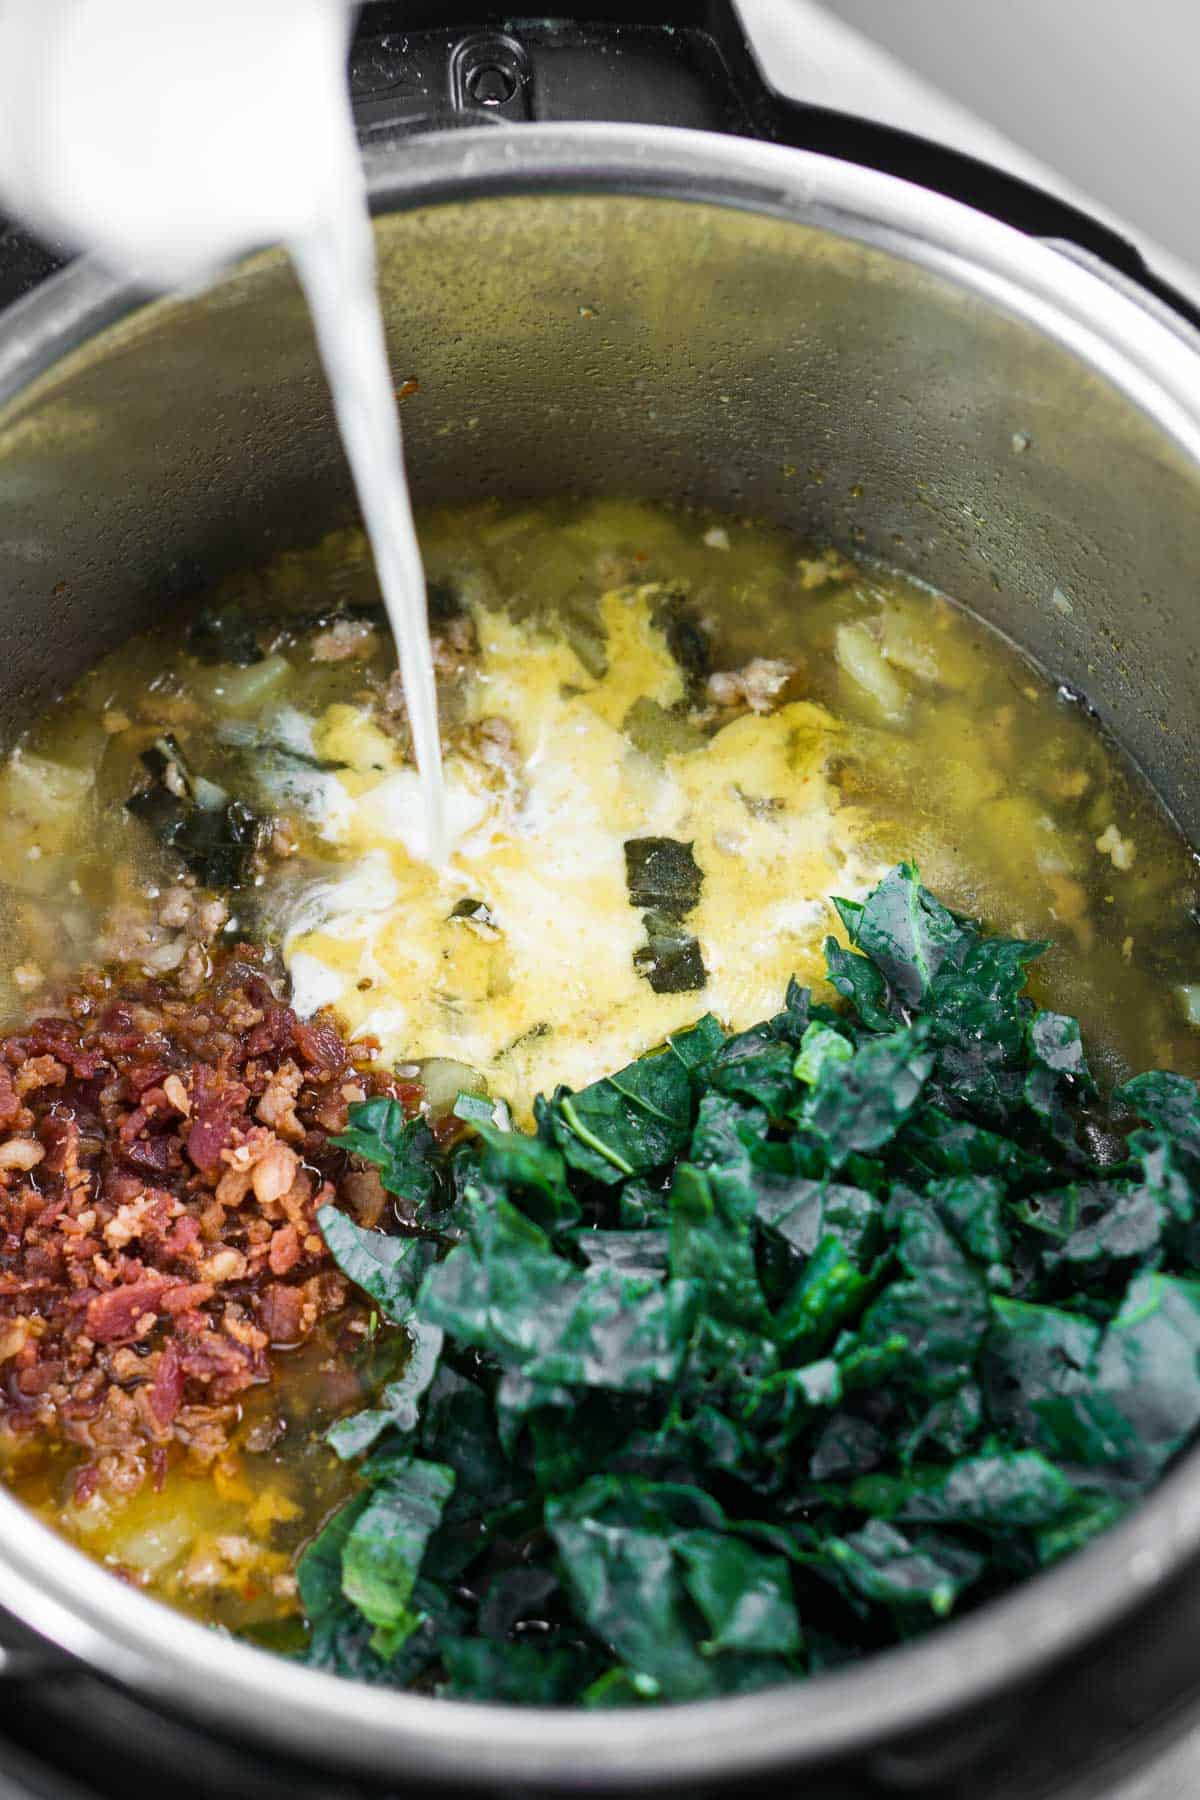 Heavy cream is added to pot of Zuppa Toscana soup ingredients